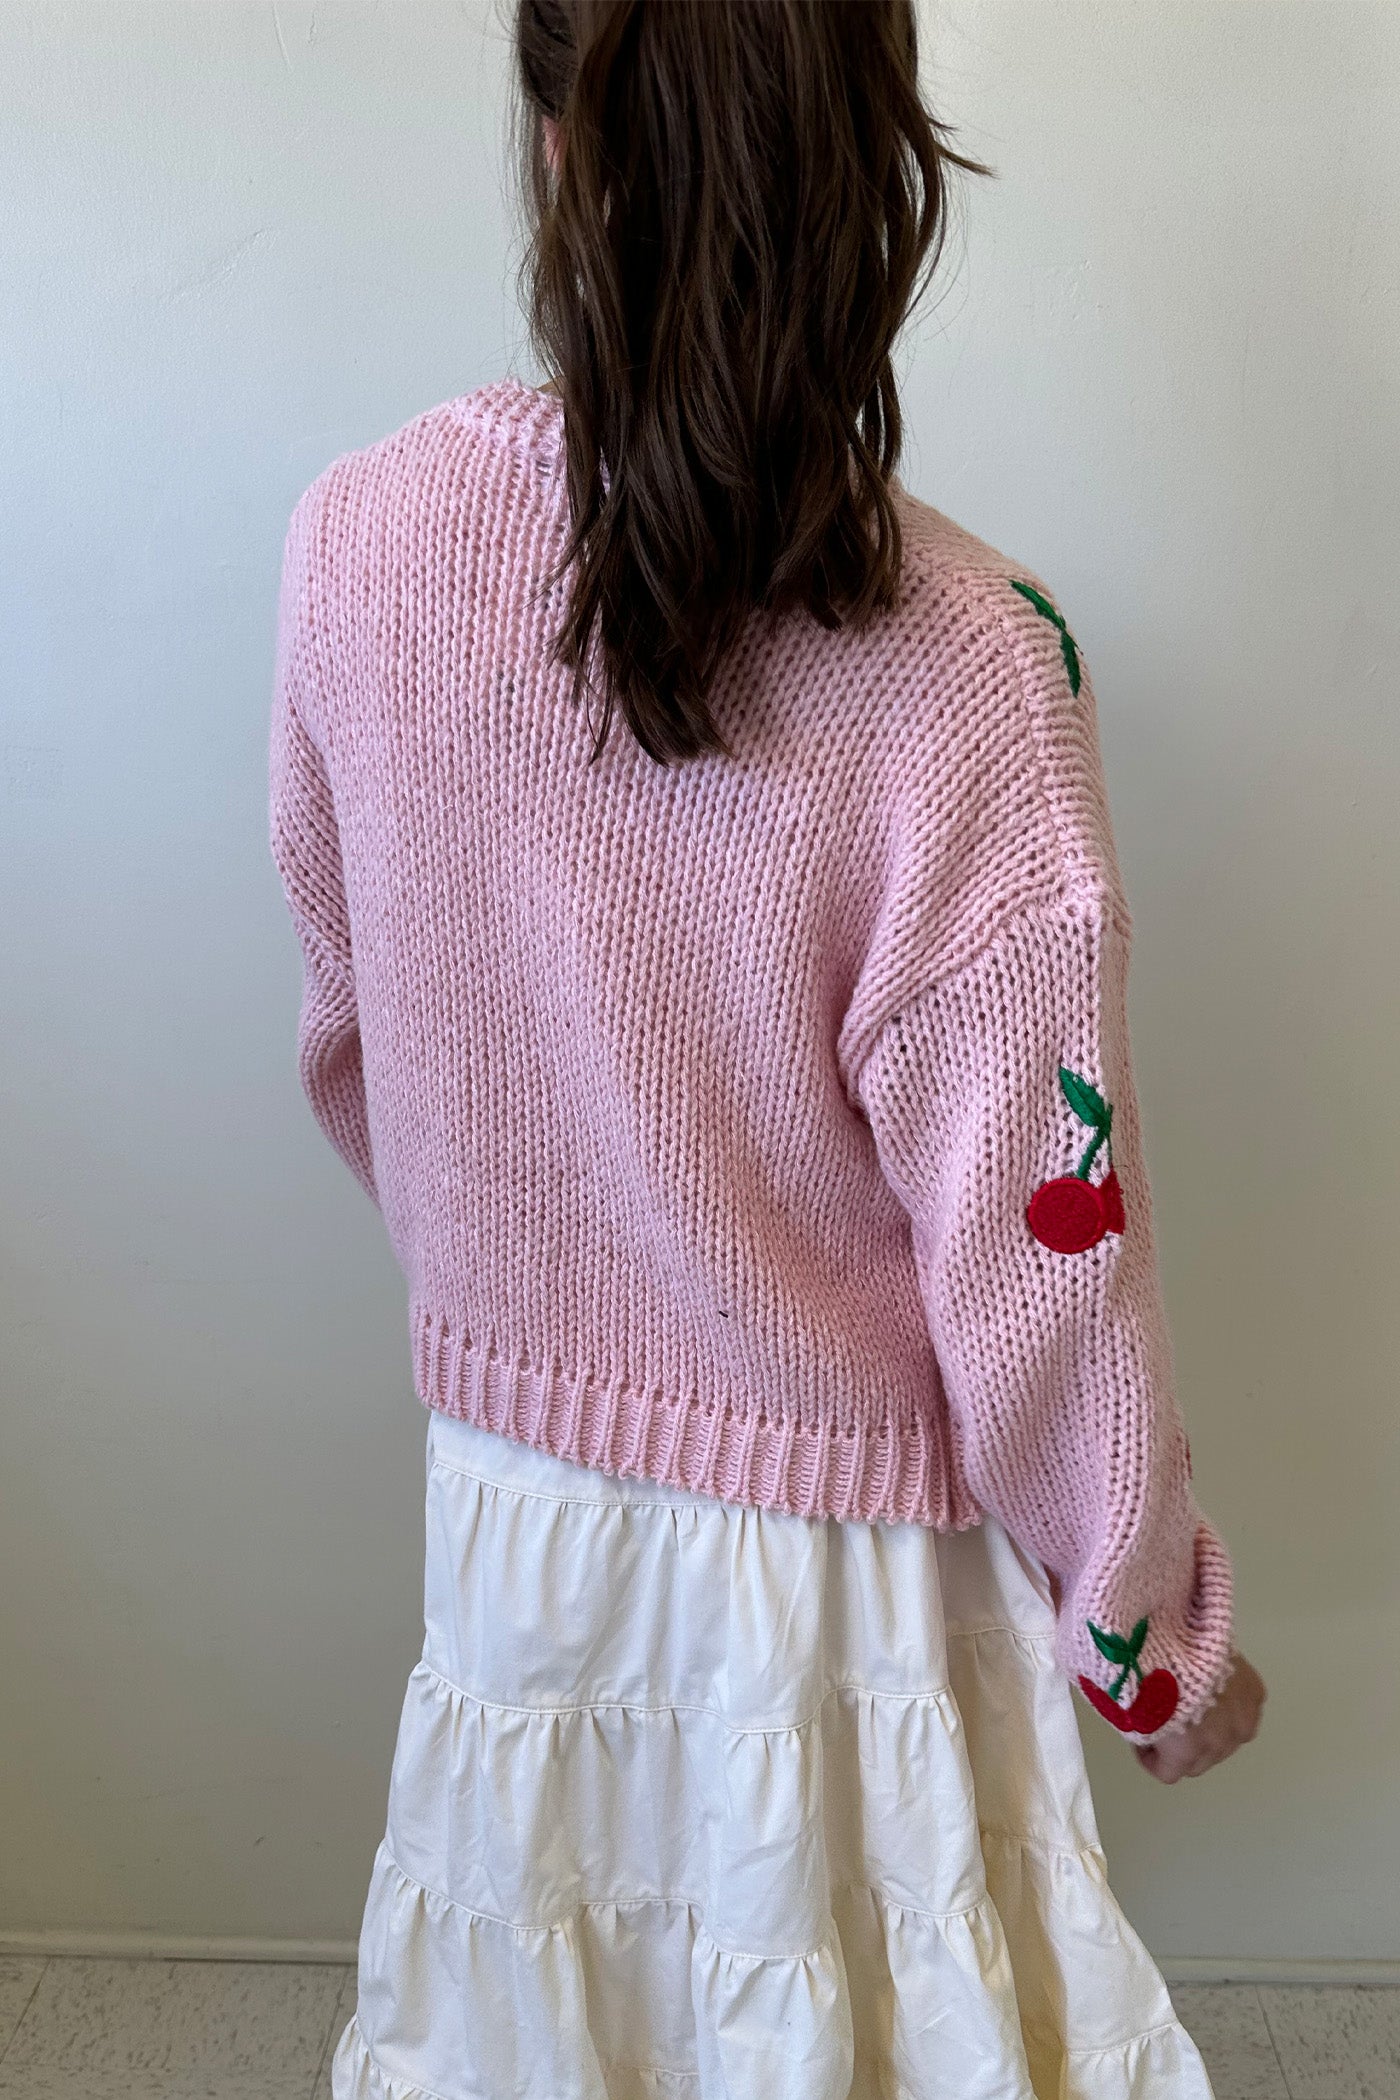 Means Nothing Crochet Sweater